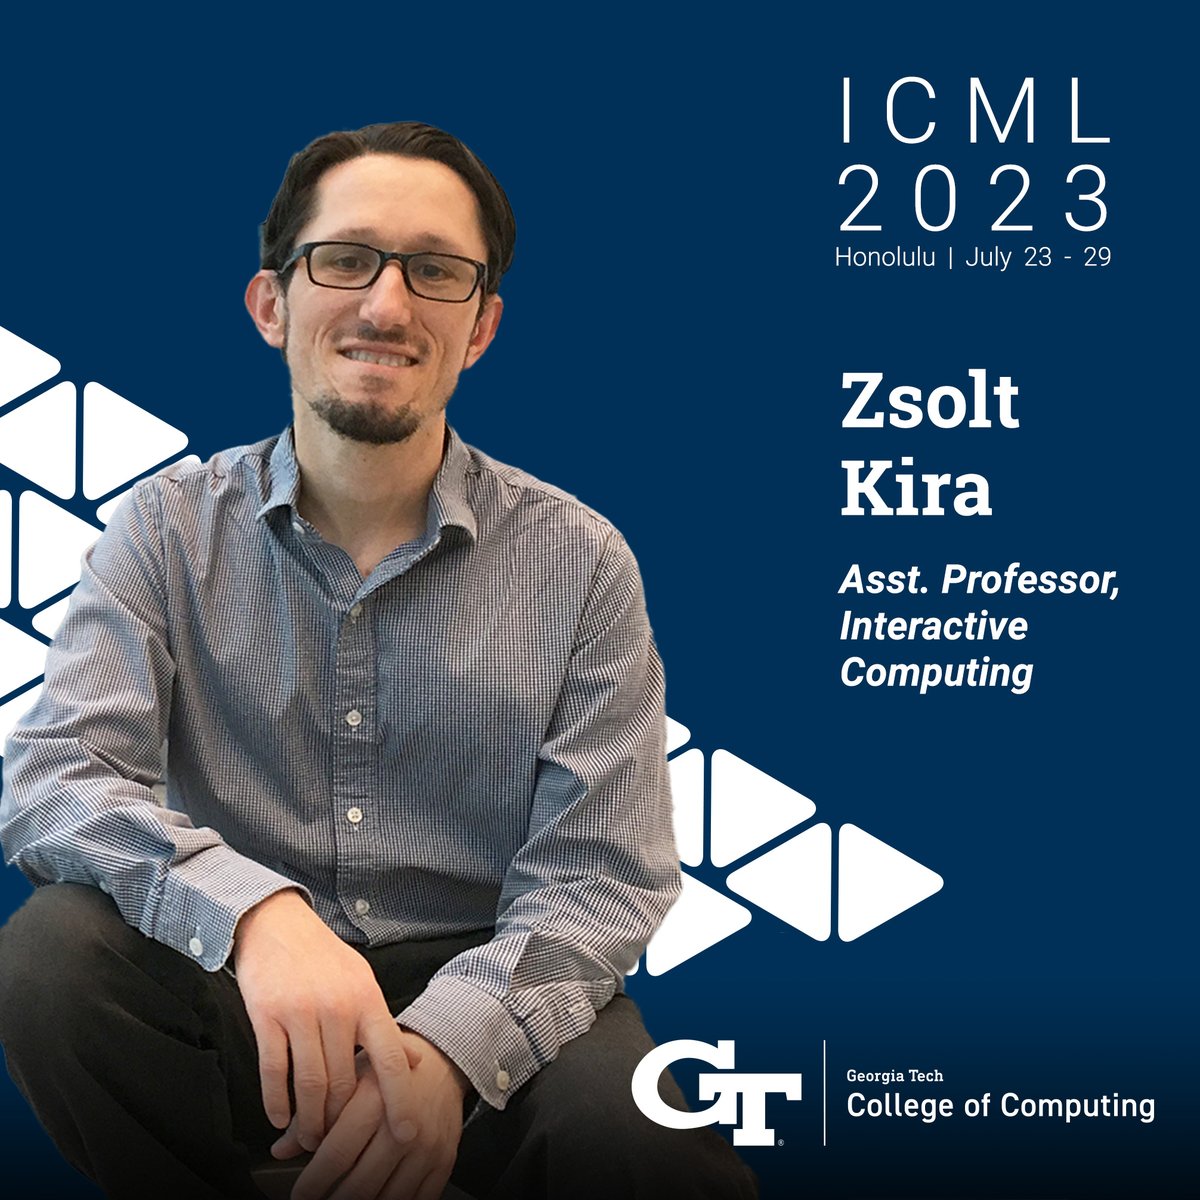 COUNTDOWN ⏳ to @icmlconf // Expert @zsoltkira  talks #AI:

As Artificial Intelligence (AI) begins to pervade society, it is important to understand how such AIs can learn to interact with each other and humans.